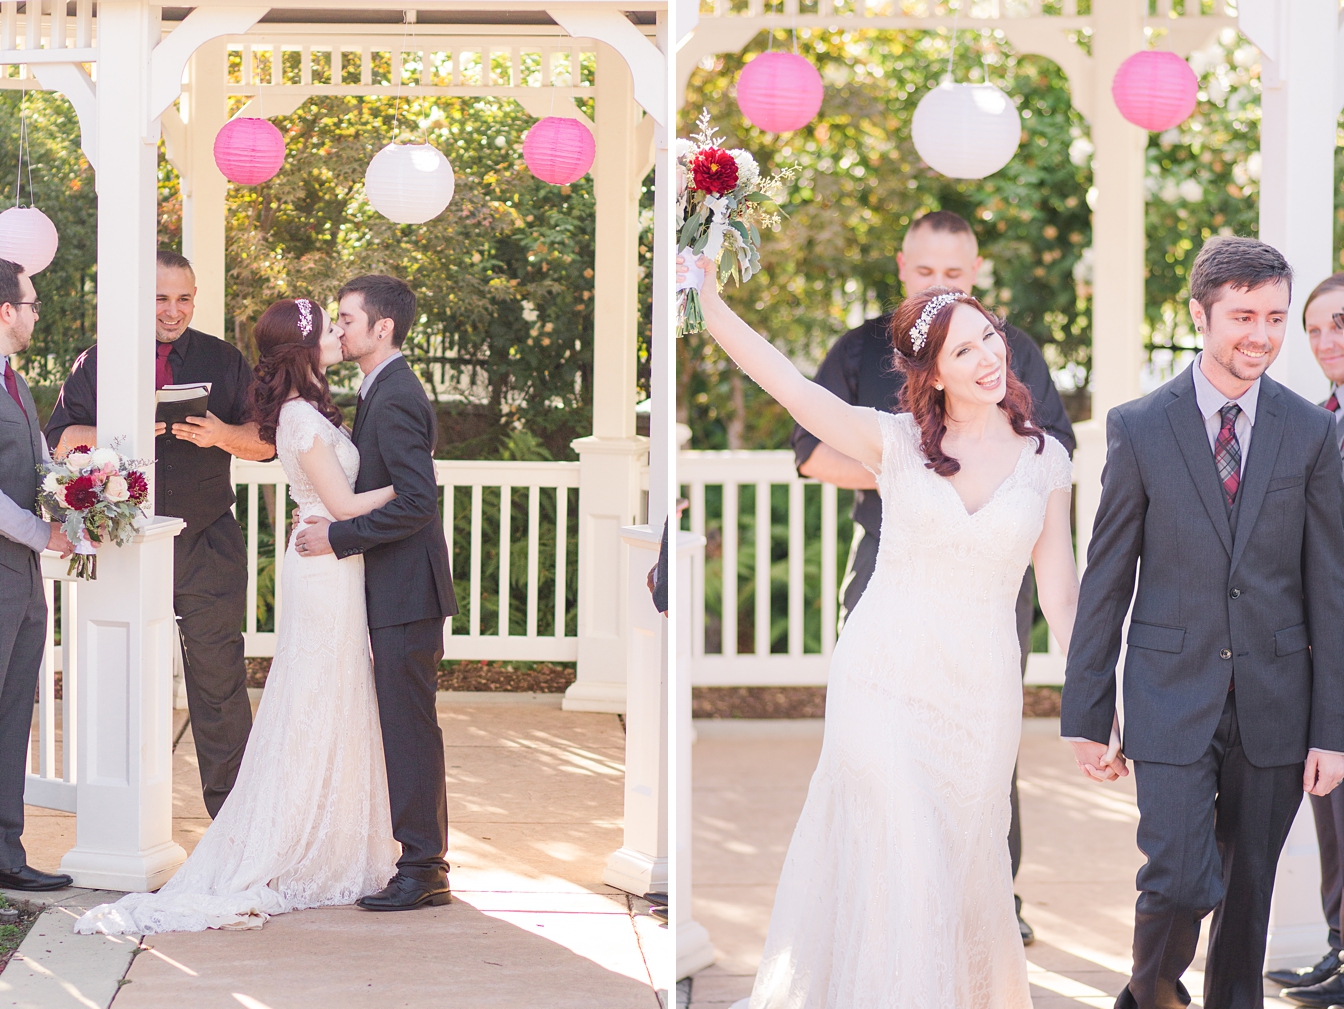 Bride and Groom wedding ceremony at the Rocklin Event Center by Adrienne and Dani Photography